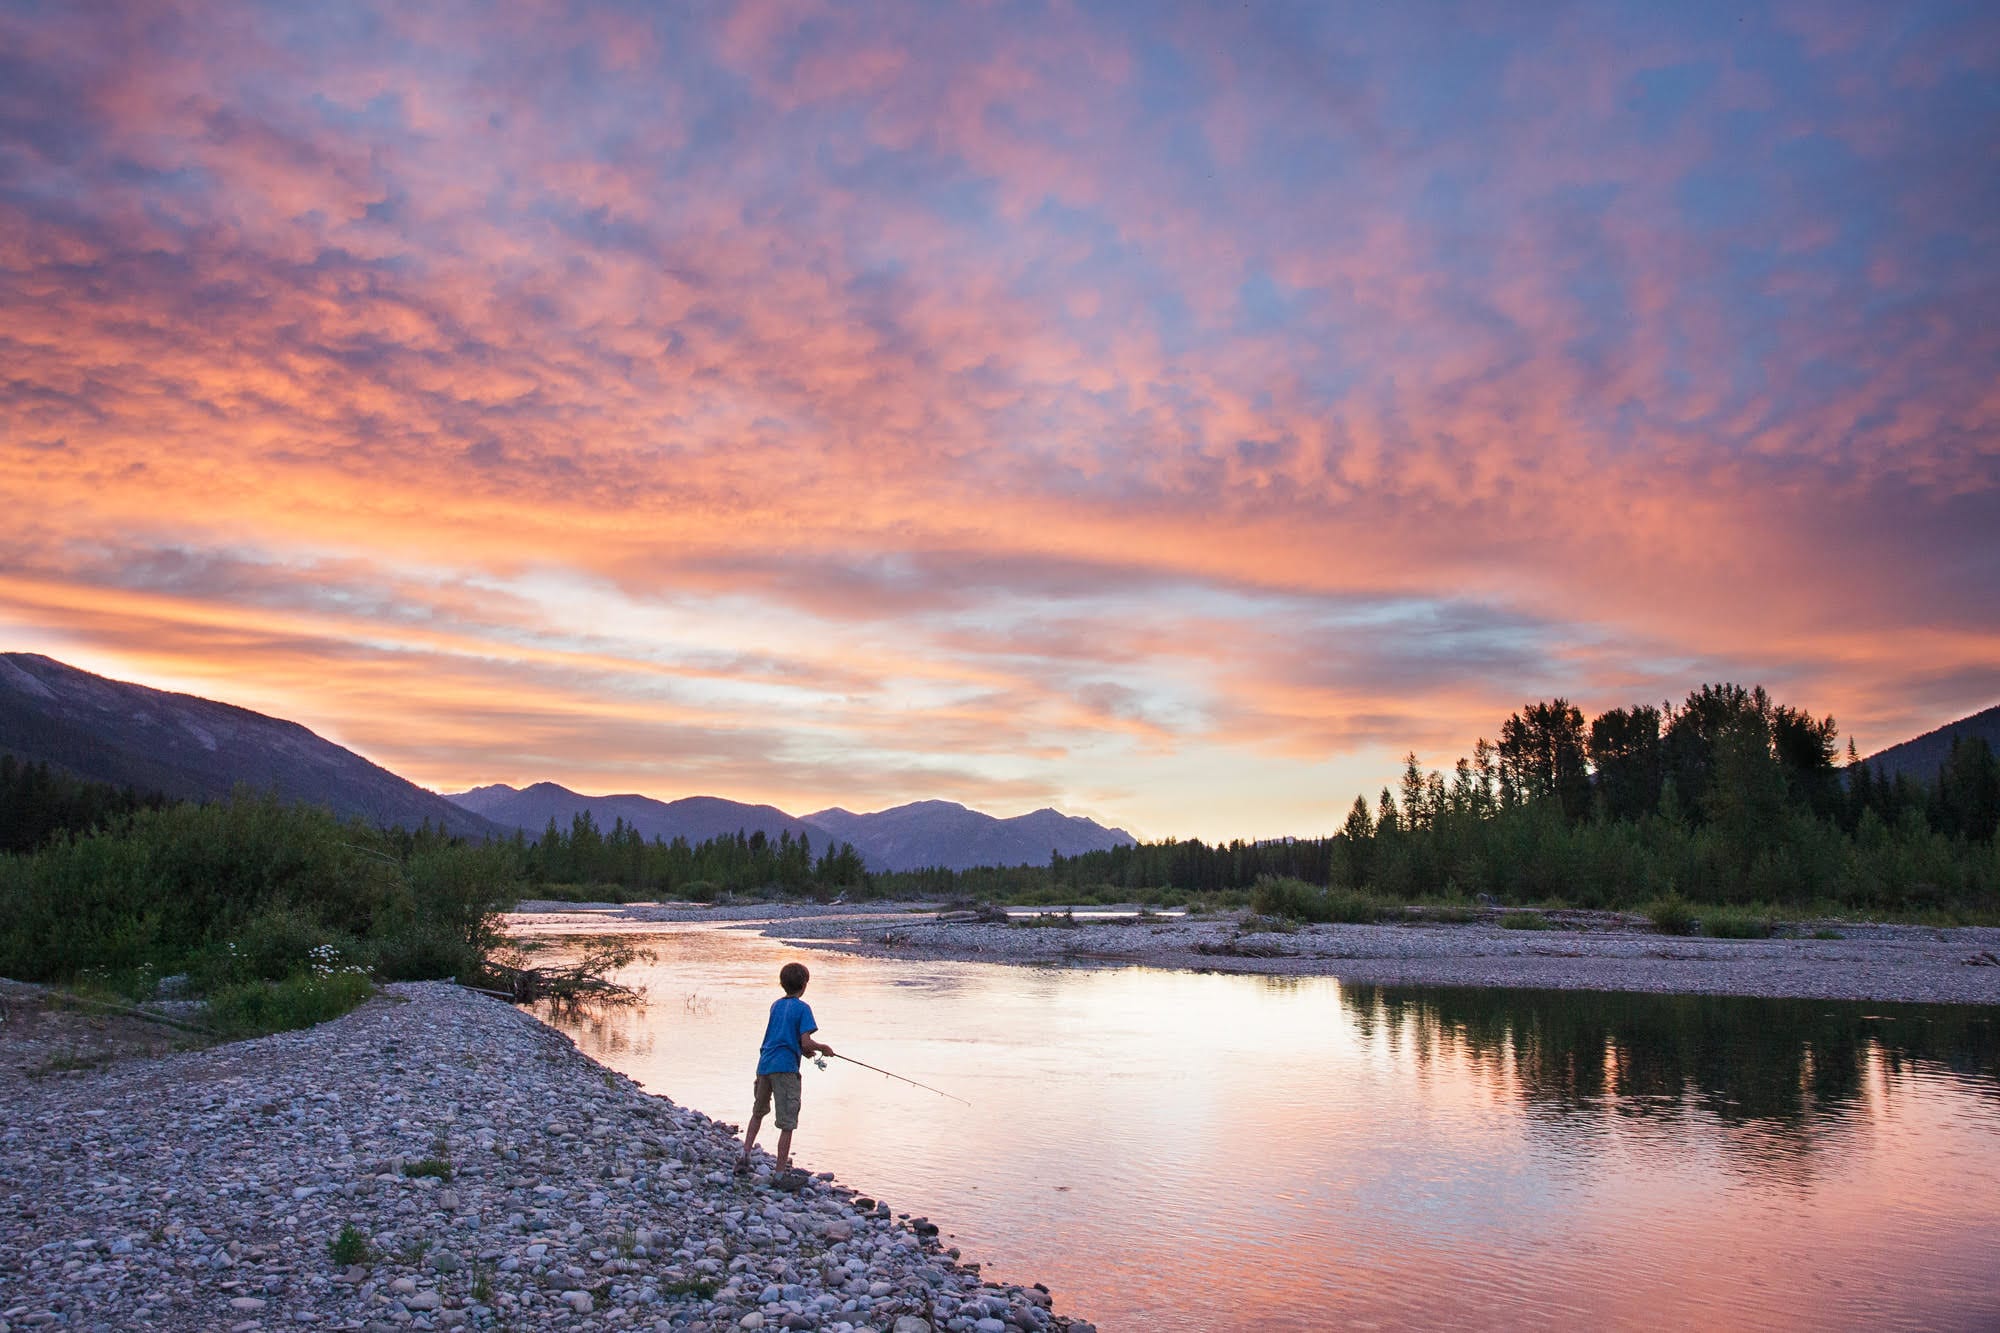 Silas Teasdale fishes the sunset on Montana's North Fork Flathead River. The area is a drainage connected to lakes that were treated with rotenone. © Aaron Teasdale for Public Herald